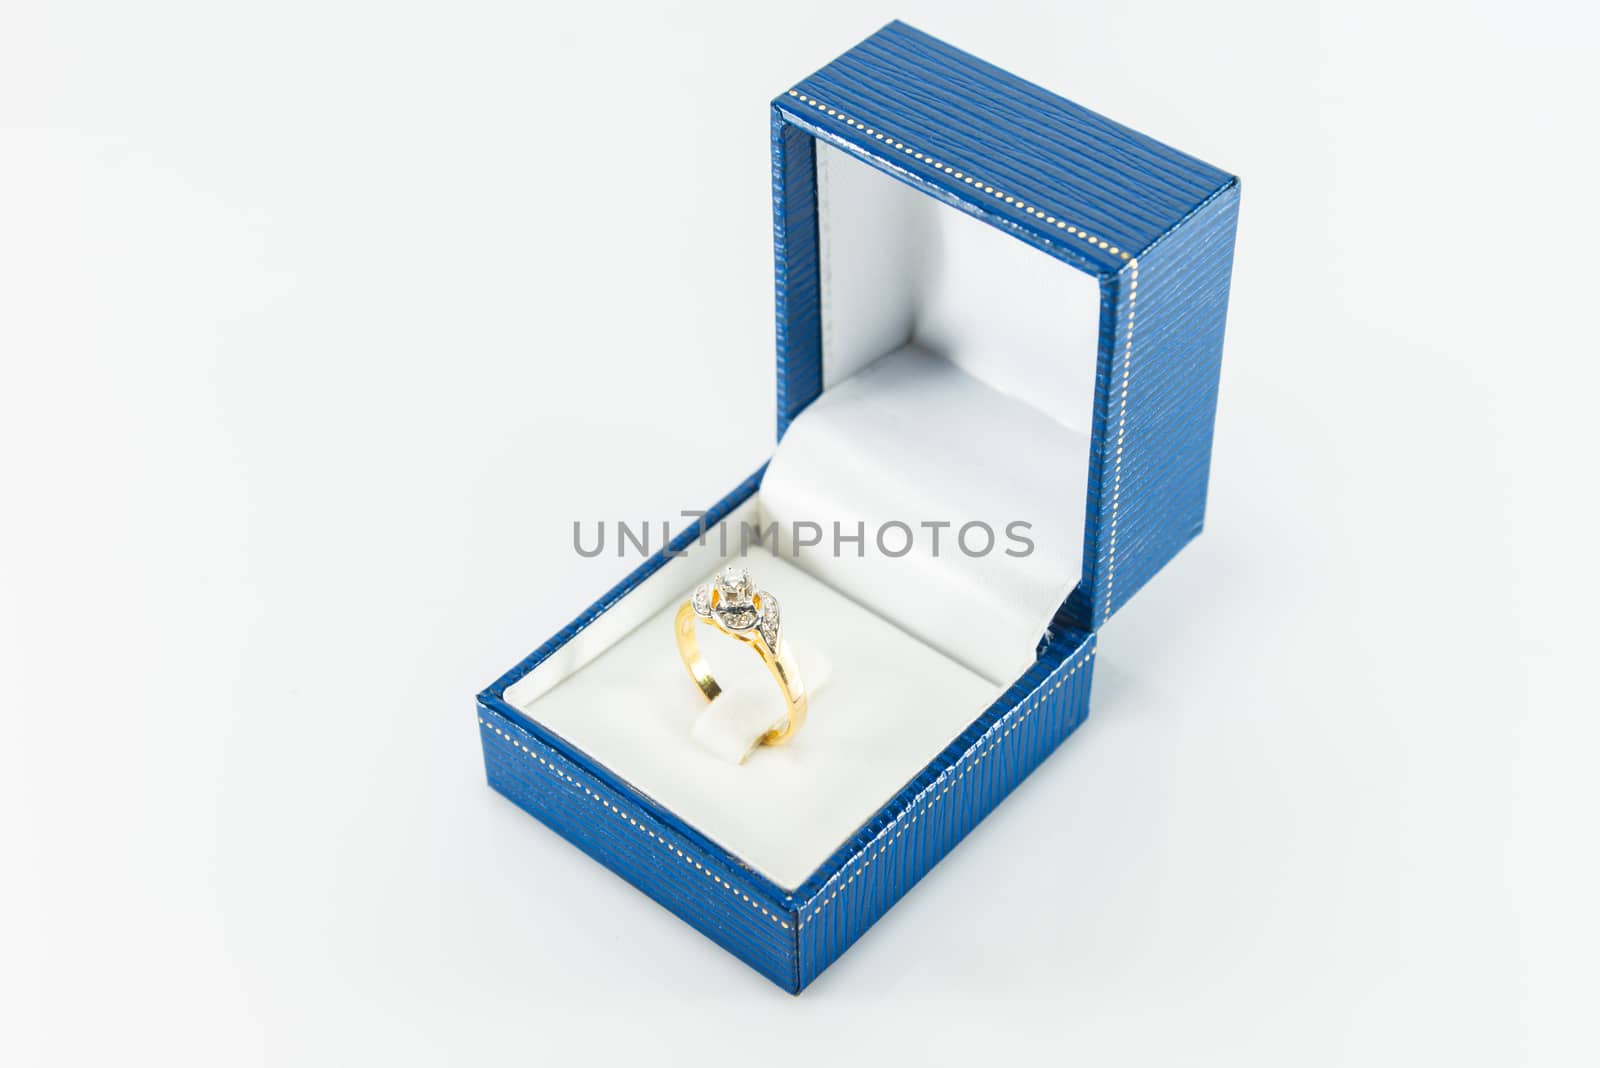 Diamond ring in Blue Box on white background.